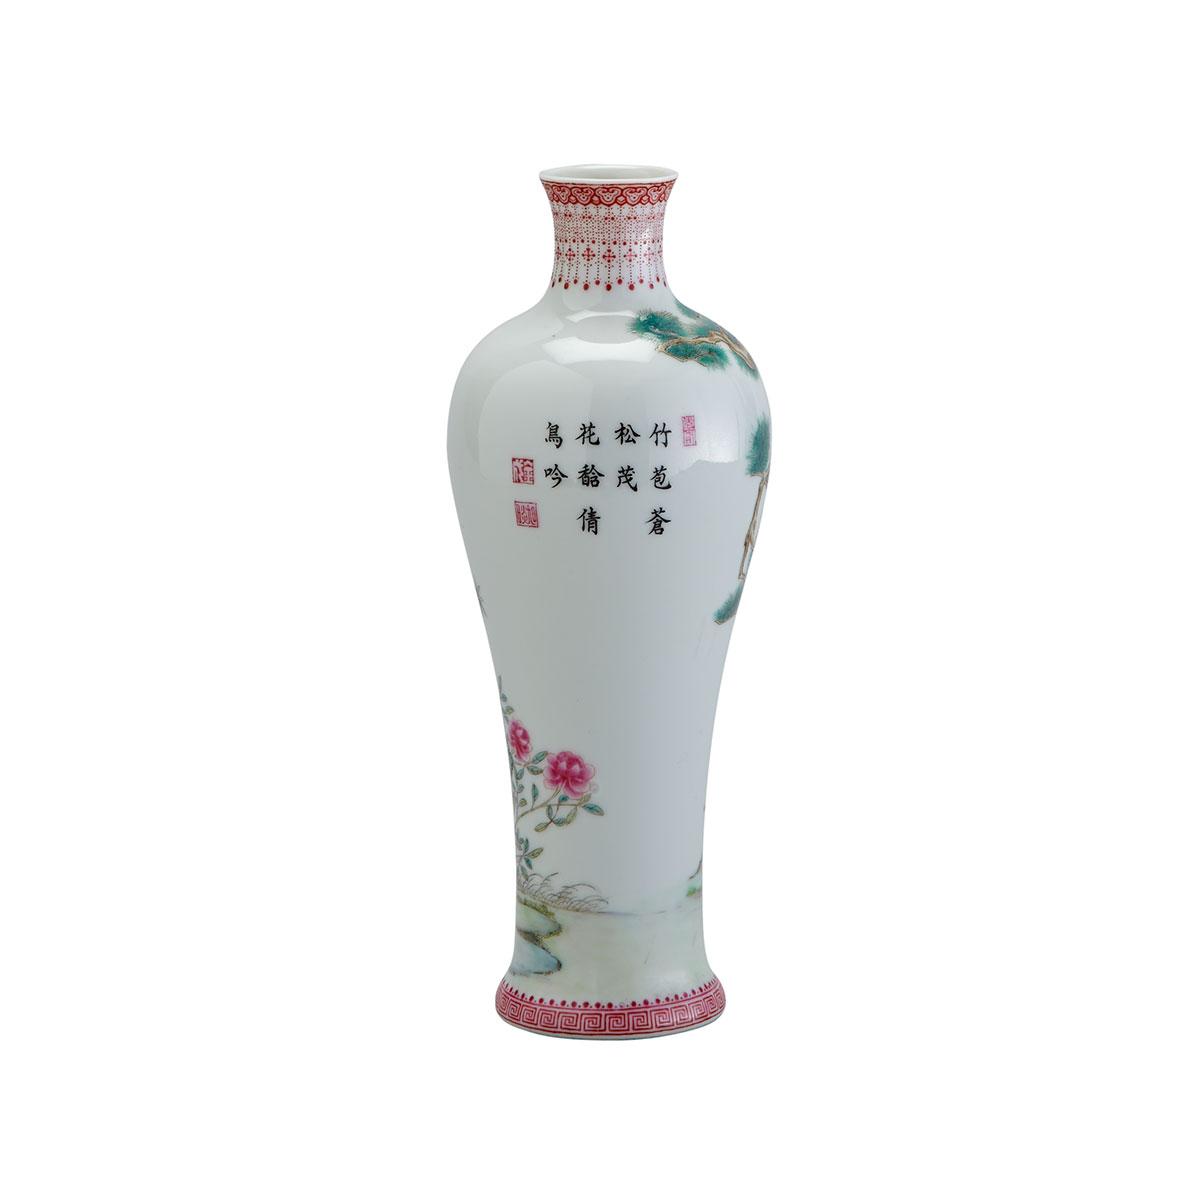 Famille Rose ‘Pine and Bamboo’ Bottle Vase, Qianlong Mark, Republican Period